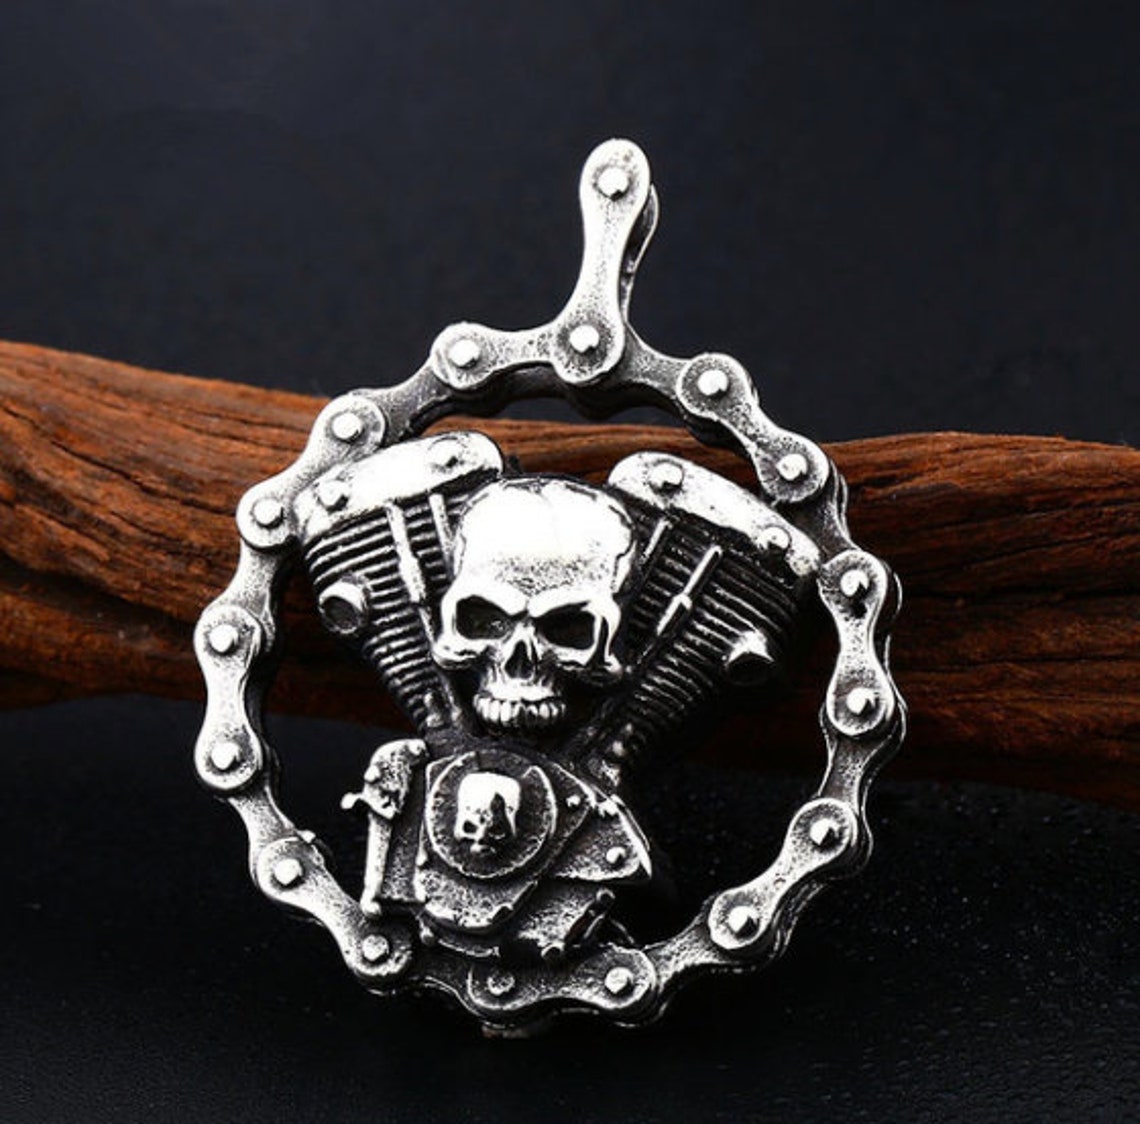 Skull Chain Necklace Cool Heavy Bicycle Skull Motorcycles - Etsy